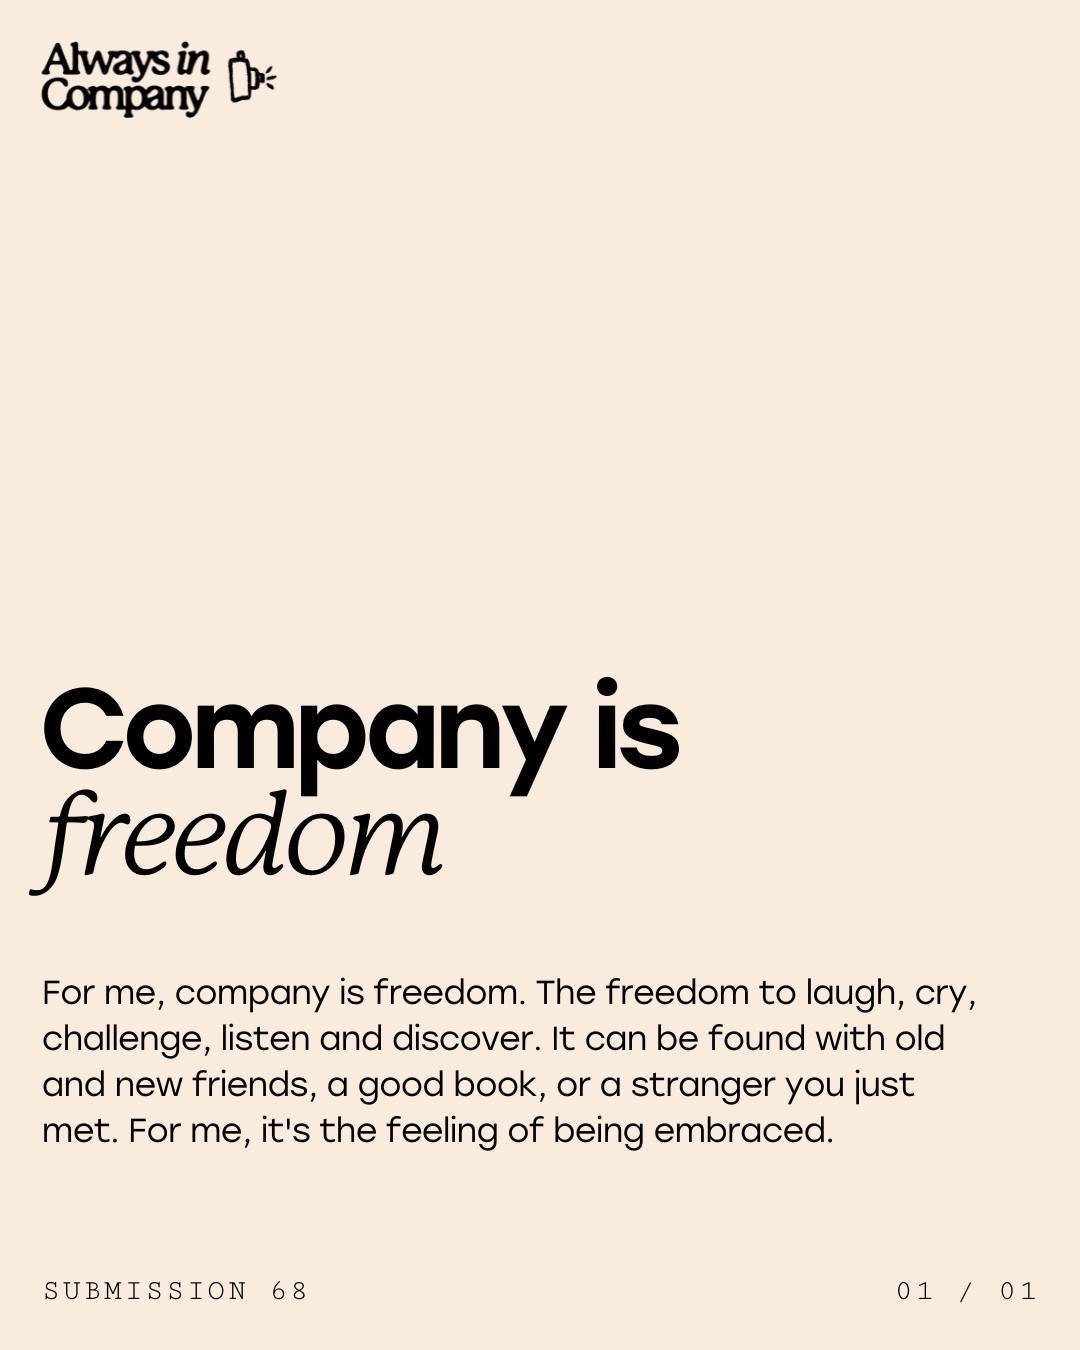 Company can be defined as 'freedom'. 

Freedom is a feeling that can be found through different emotions evoked from those who you surround yourself with, from activities you do, and from embracing who you are. 

What does company mean to you? Explor